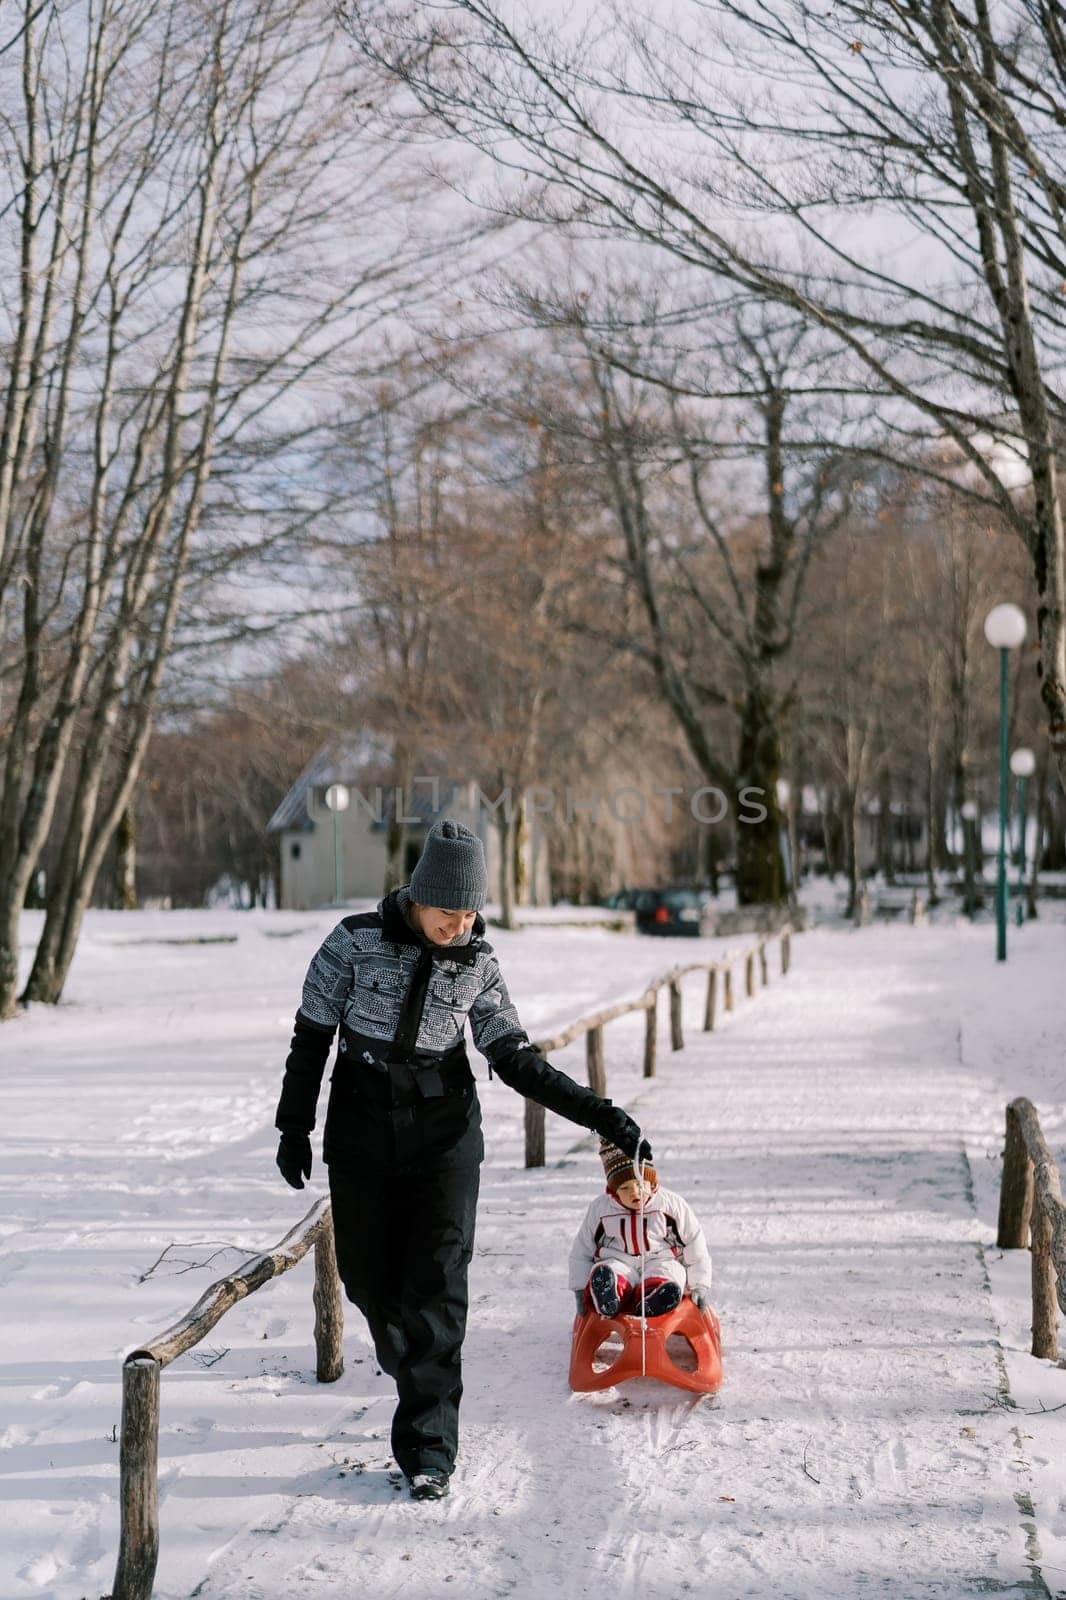 Mom carries a small child on a sled along a snowy path in the park by Nadtochiy